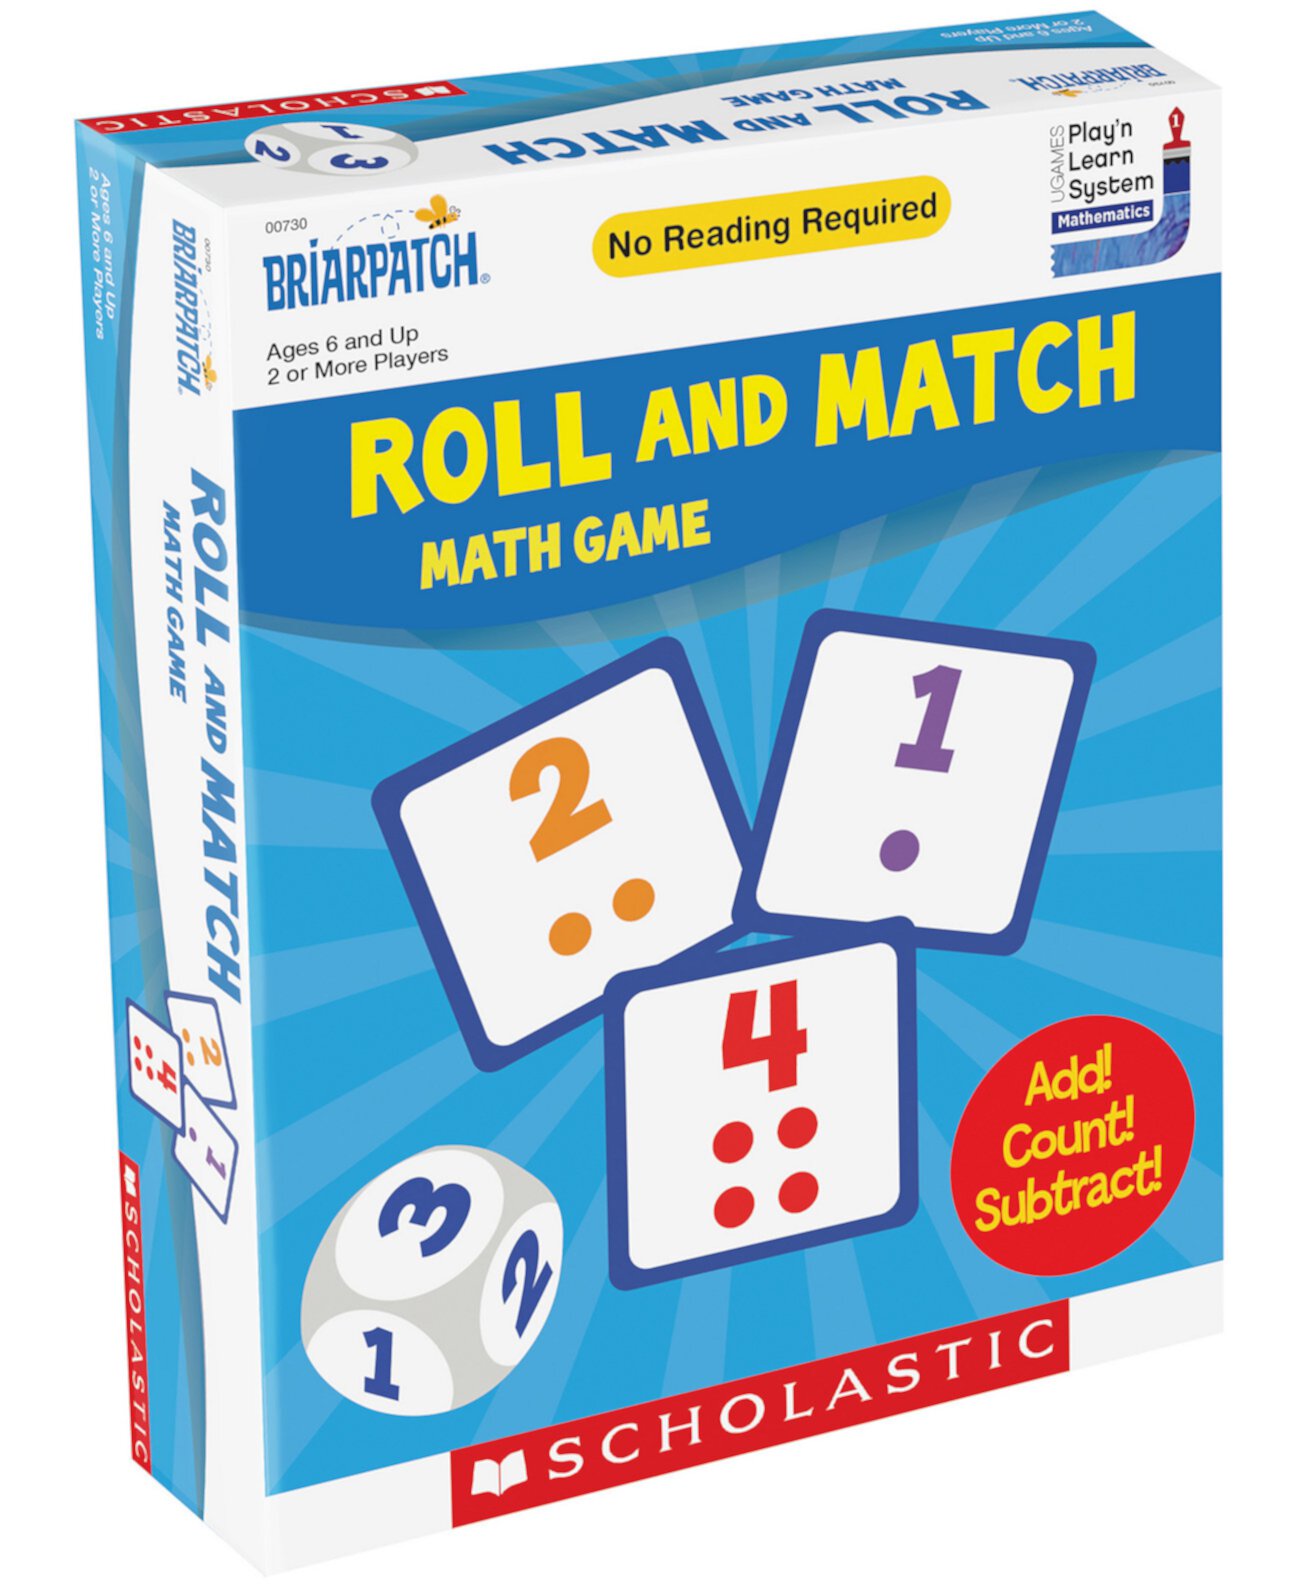 Briarpatch Scholastic Roll and Match Math Game Areyougame